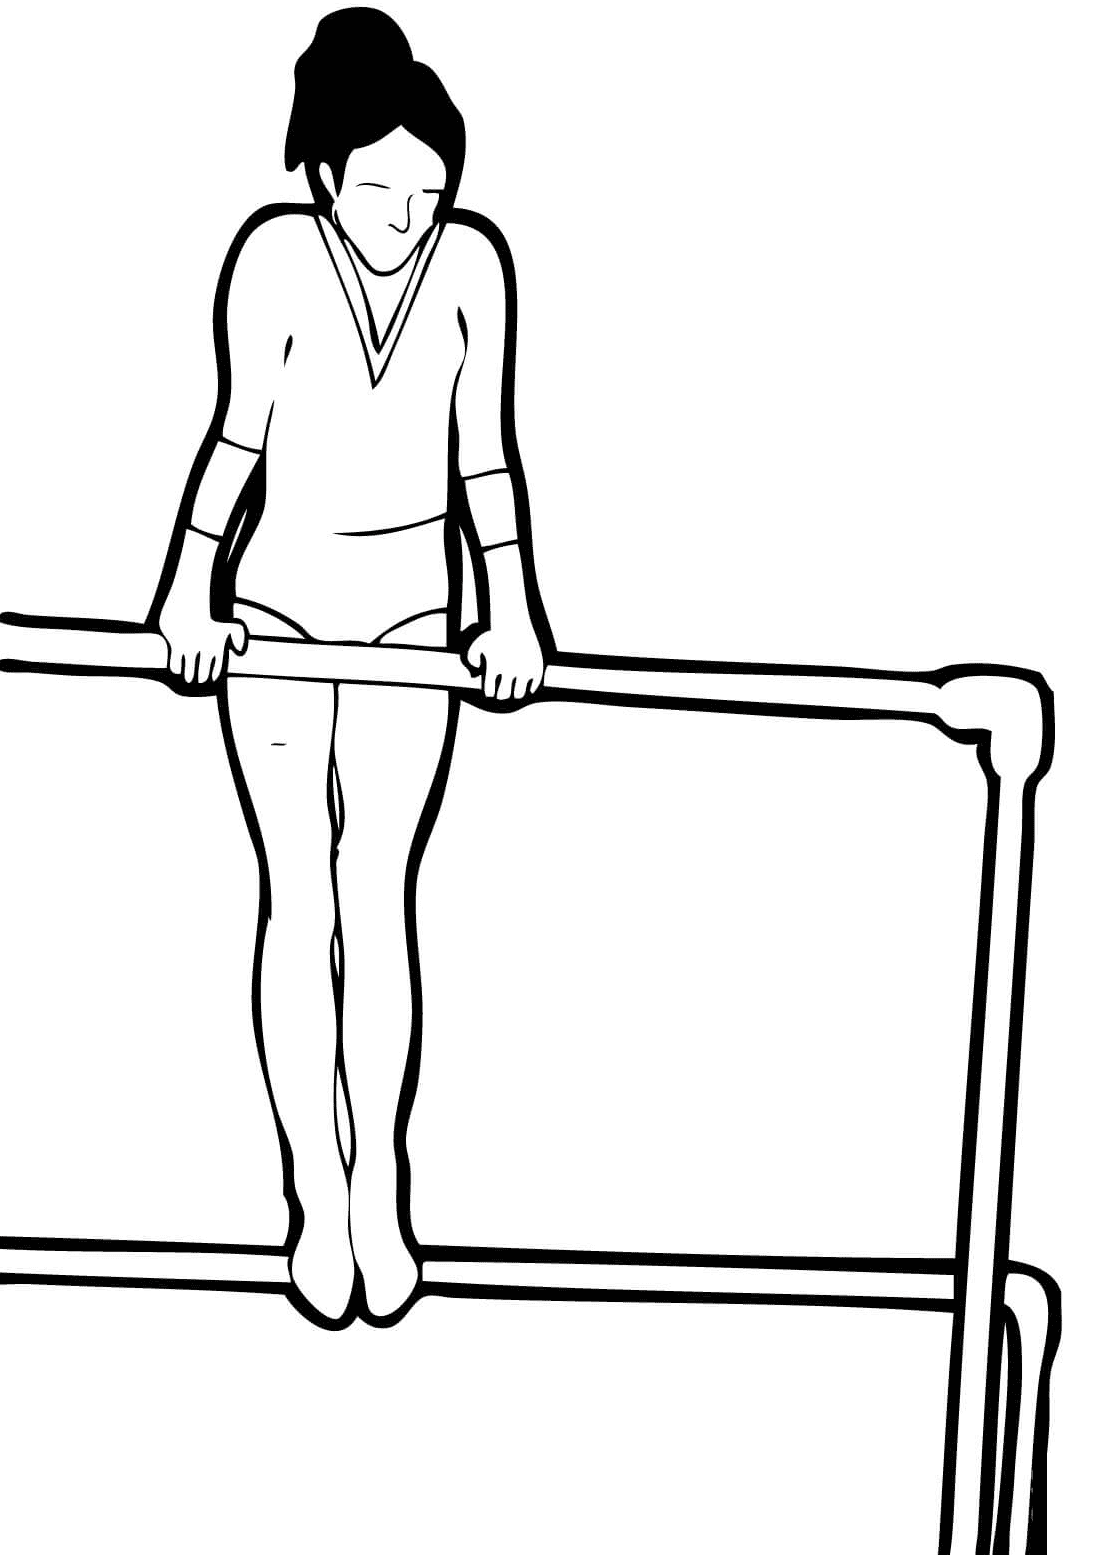 Girl on Uneven Bars Coloring Pages